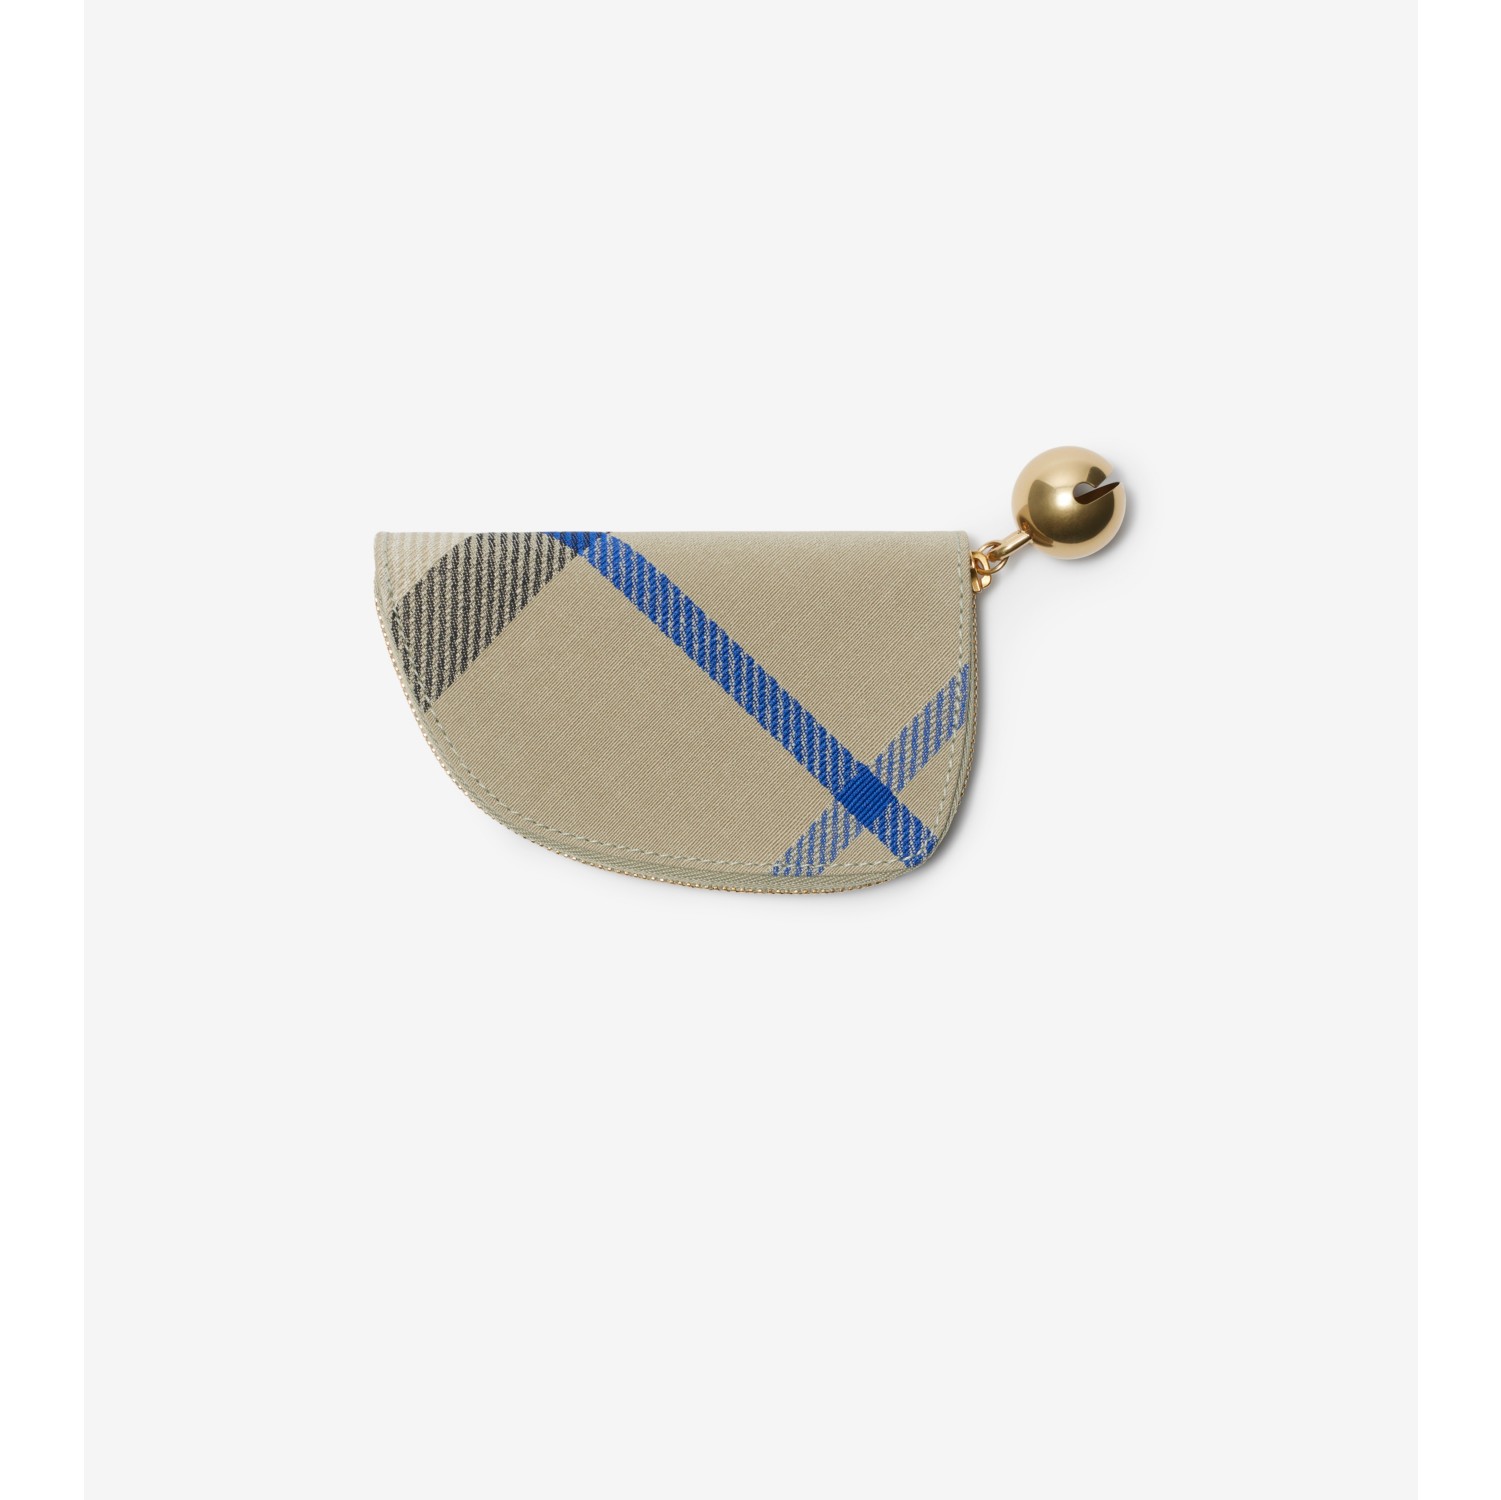 Shield Coin Pouch